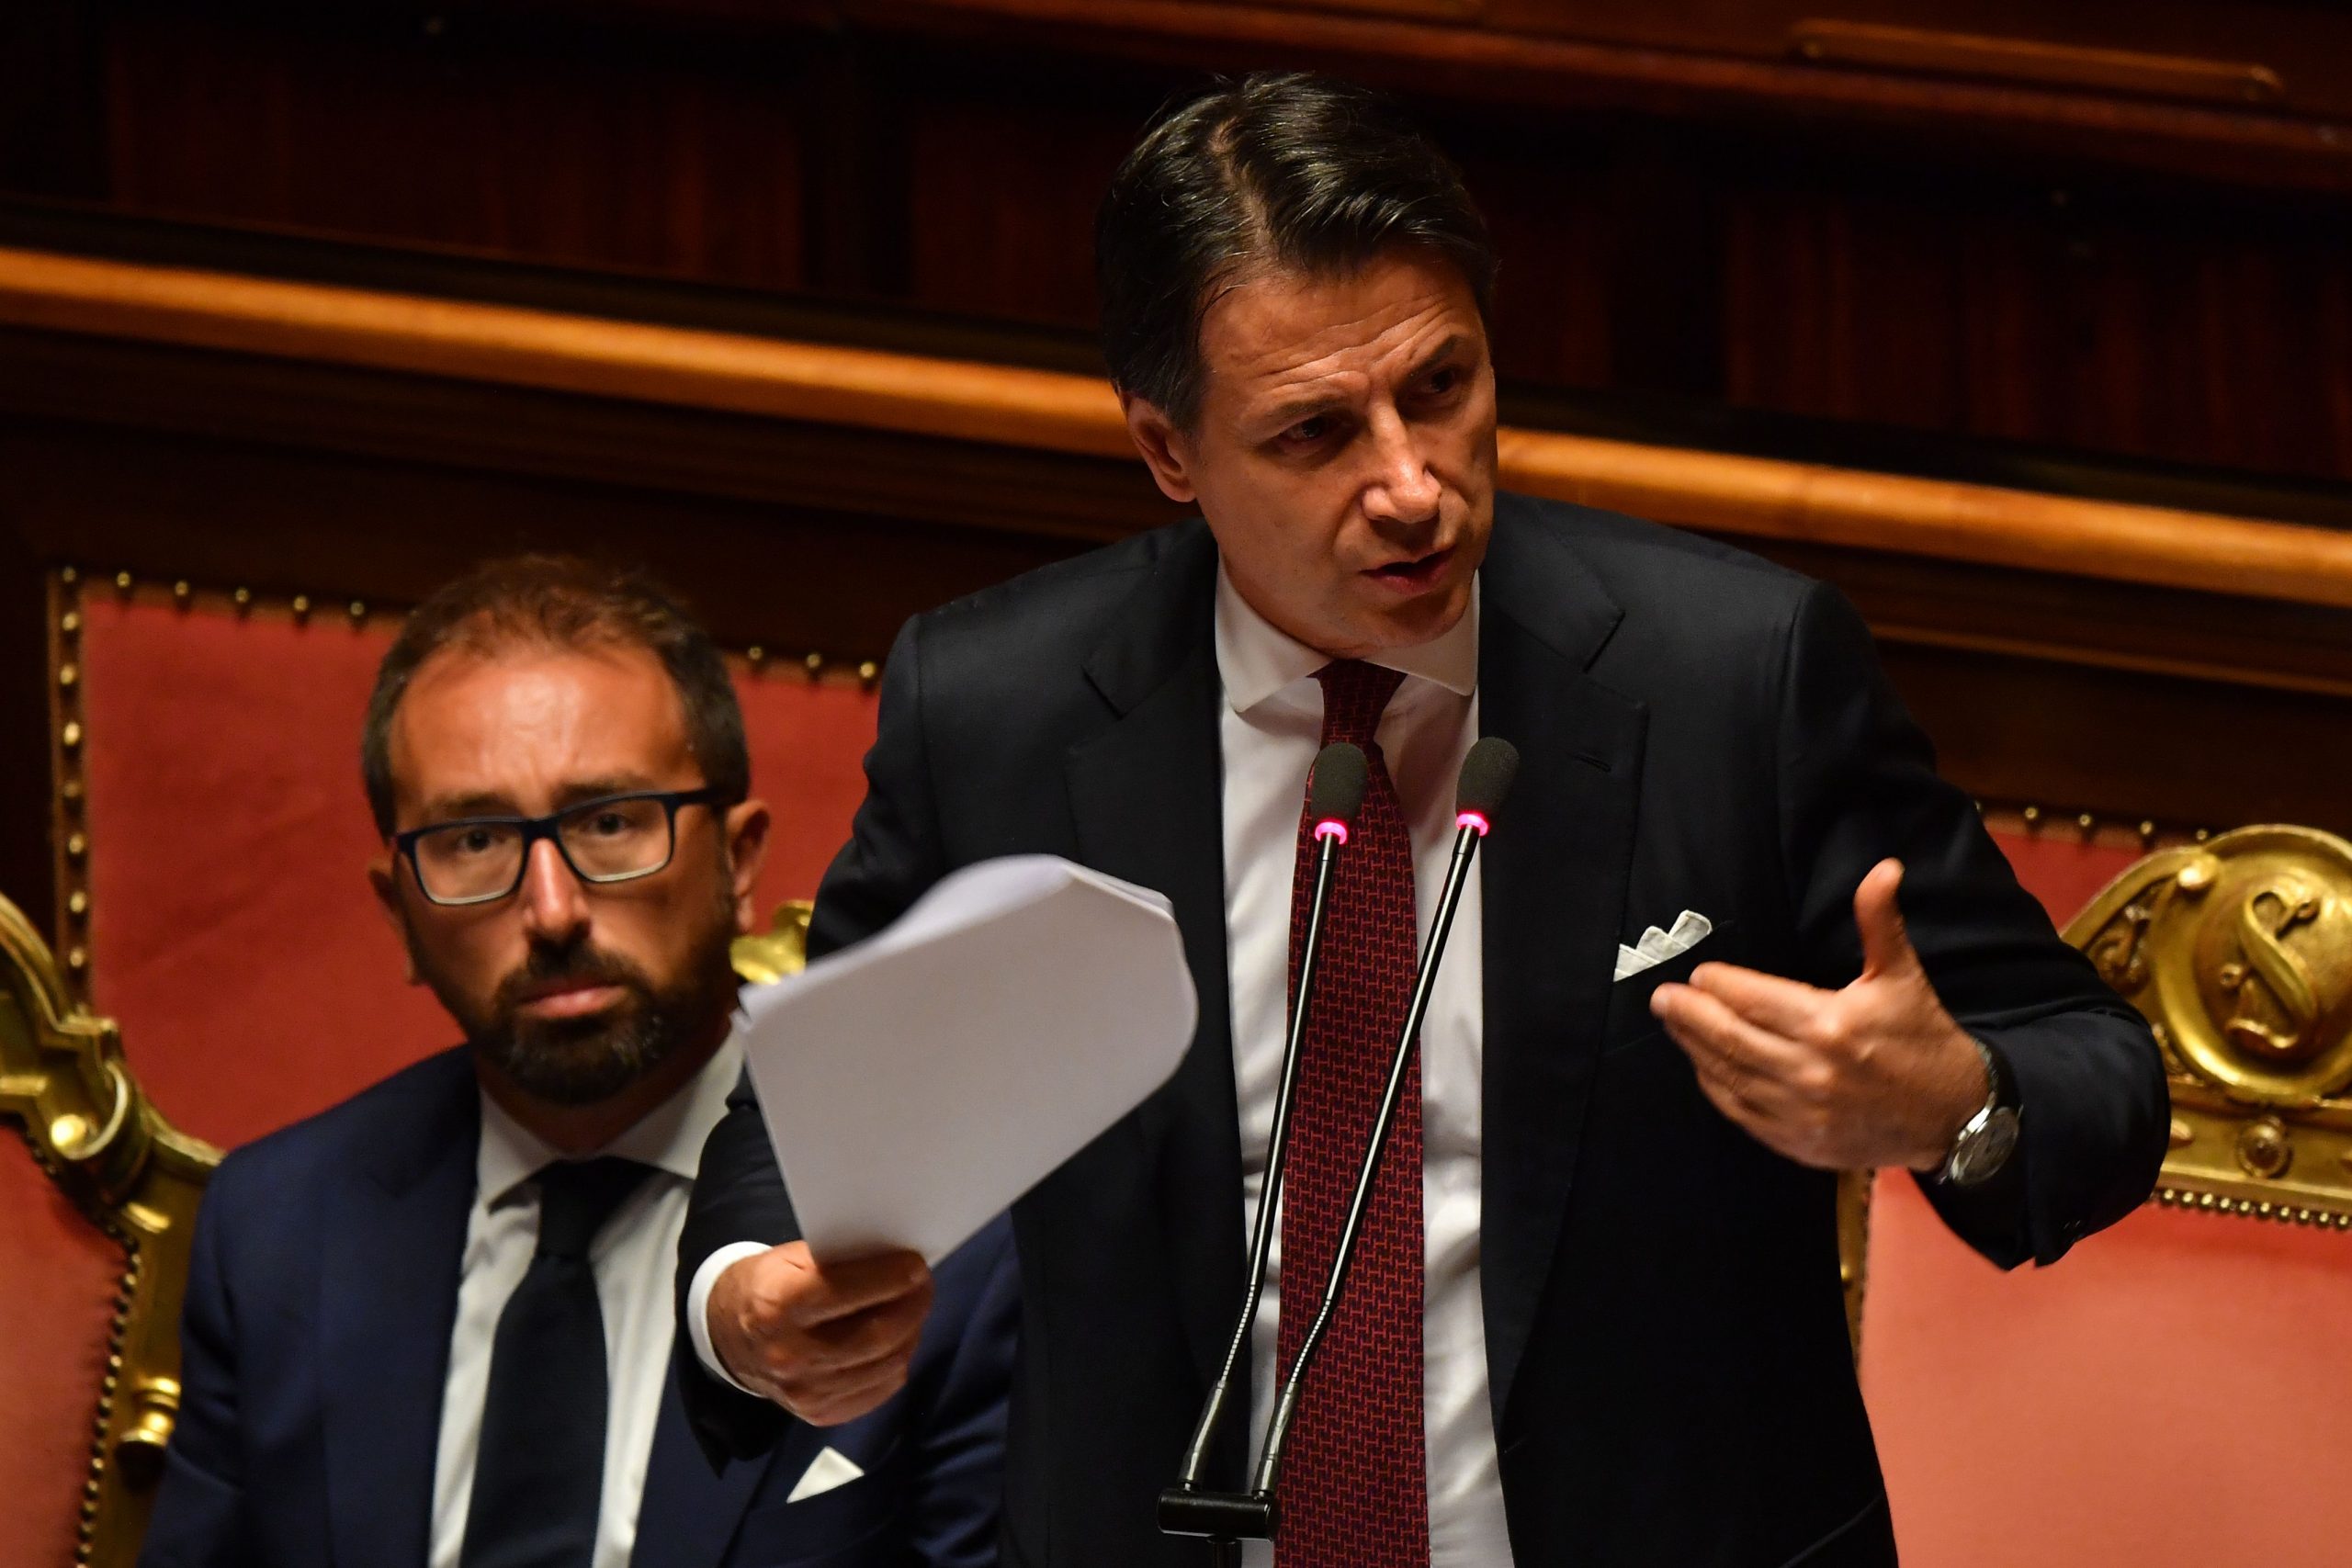 Italian Prime Minister Giuseppe Conte (Photo by ANDREAS SOLARO/AFP/Getty Images)